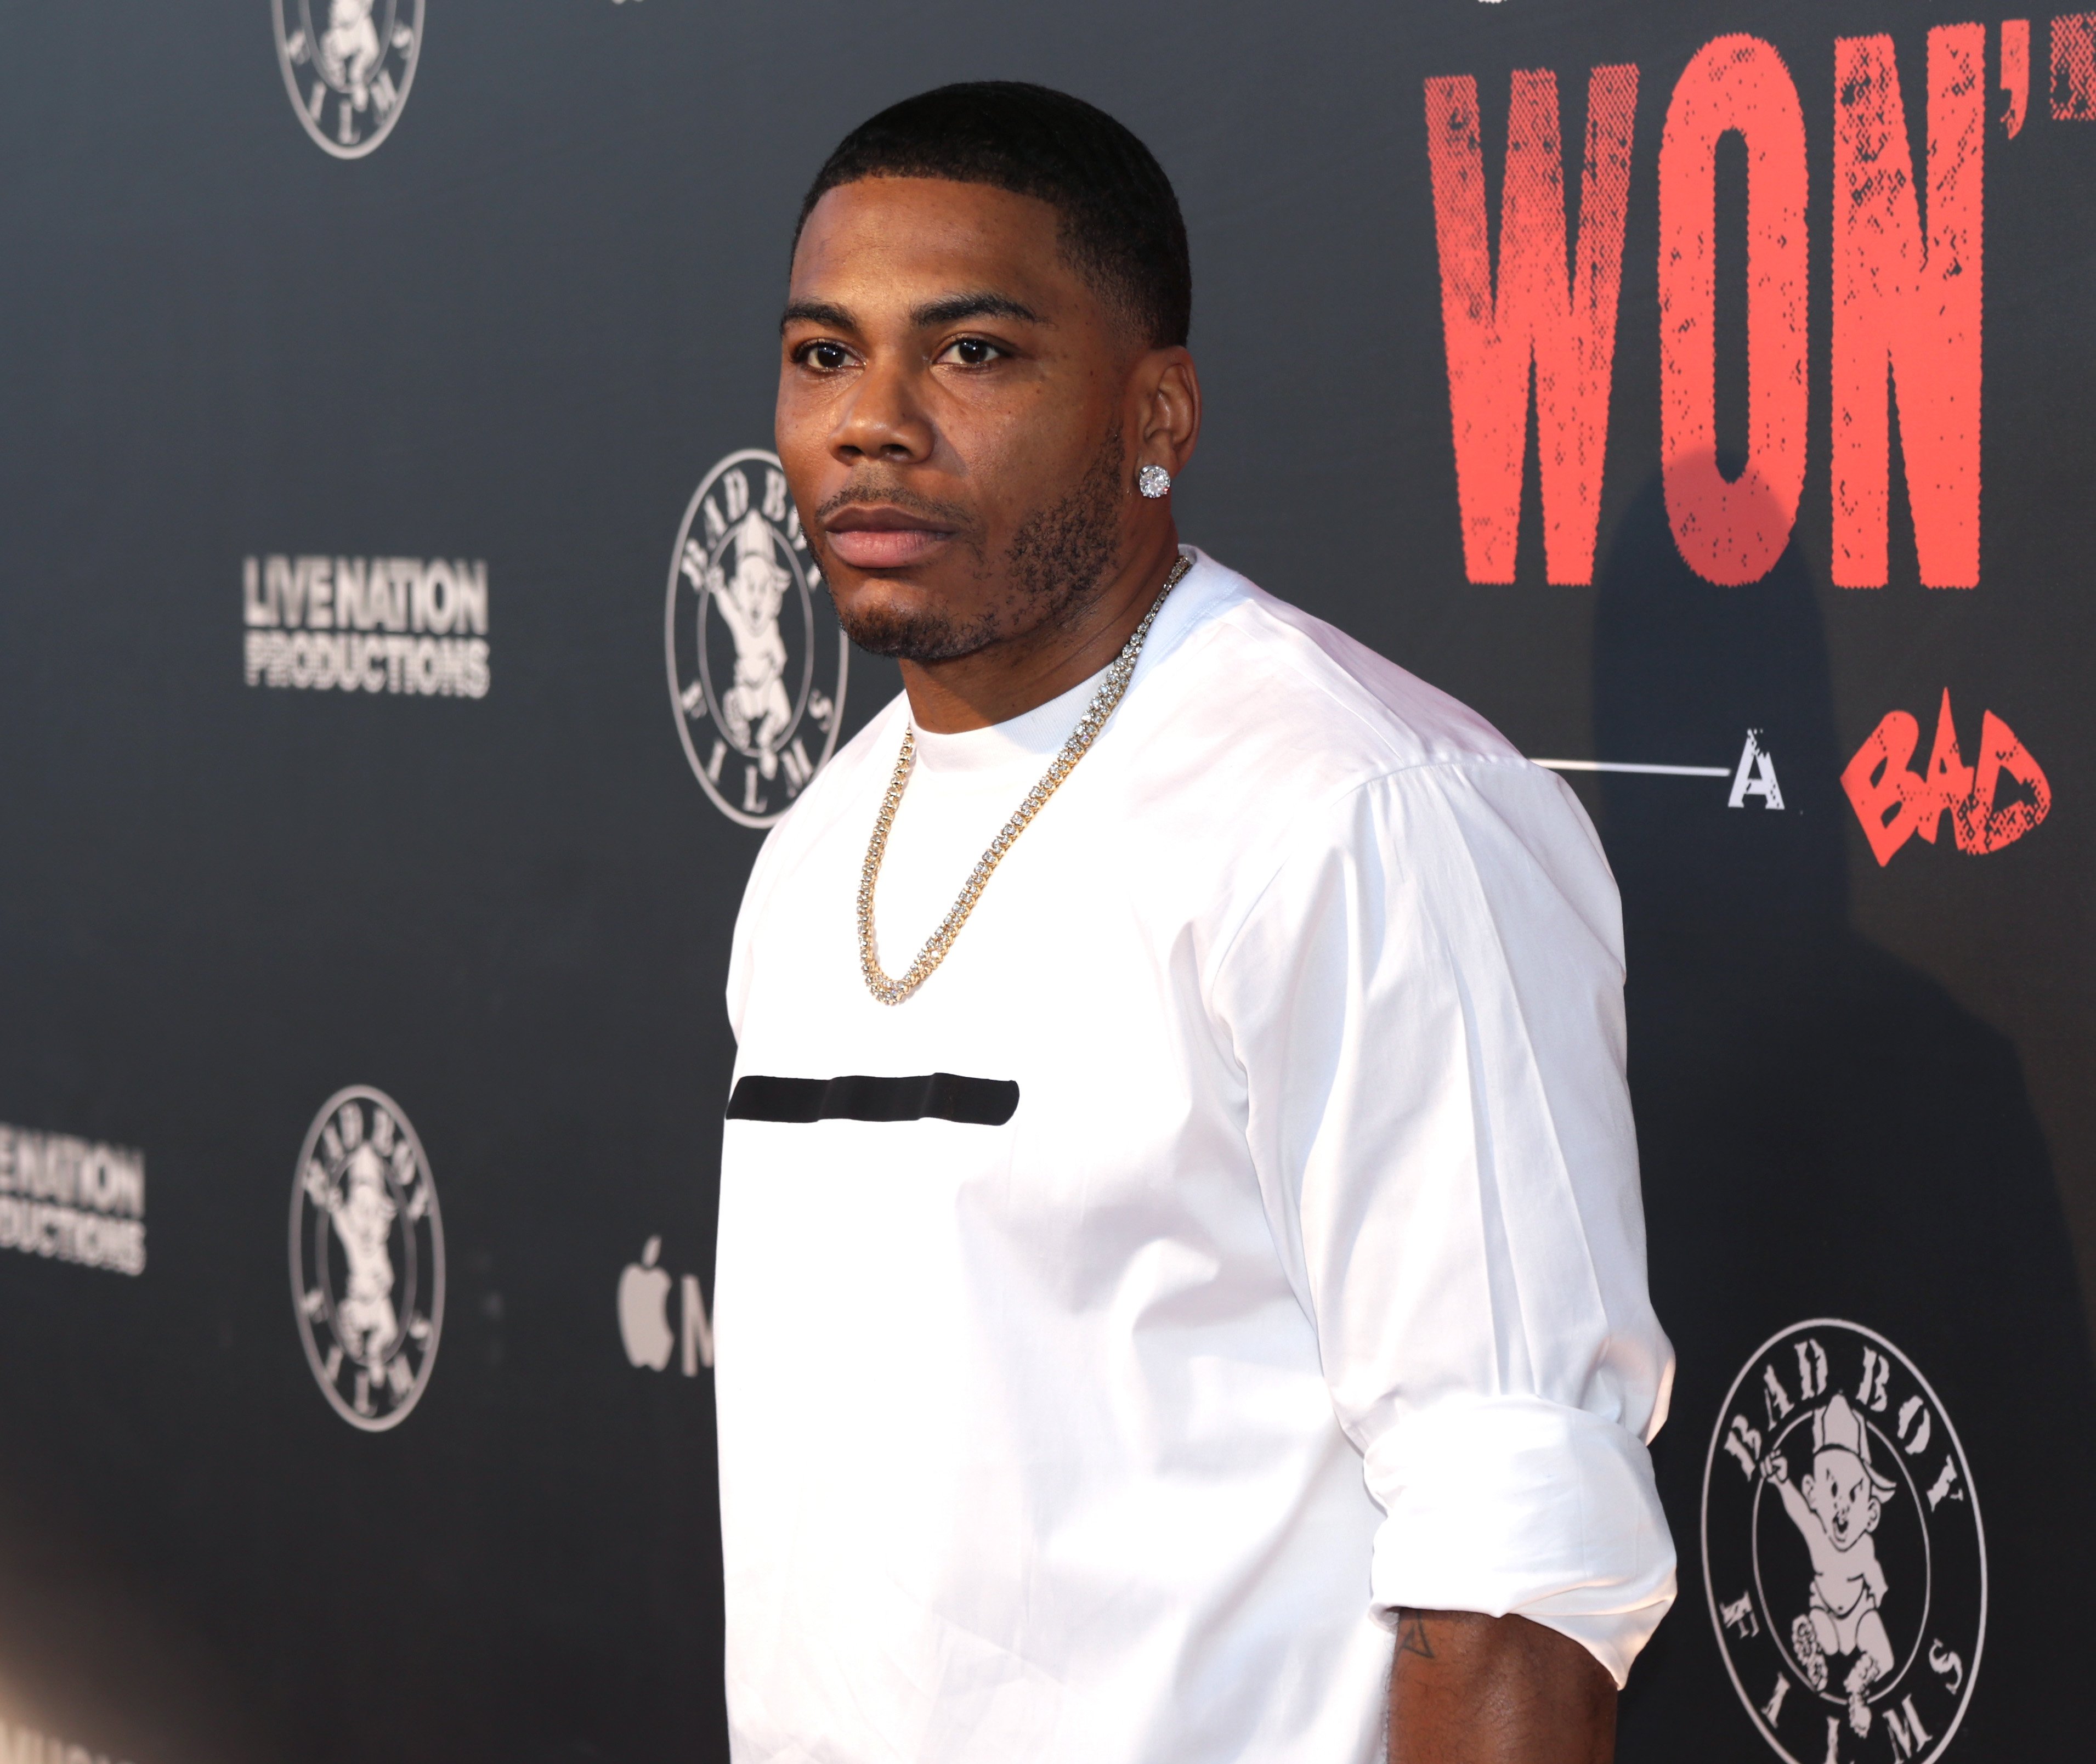 Nelly attends the Los Angeles Premiere Of "Can't Stop Won't Stop" at Writers Guild of America, West on June 21, 2017 in Los Angeles, California.  | Photo: GettyImages